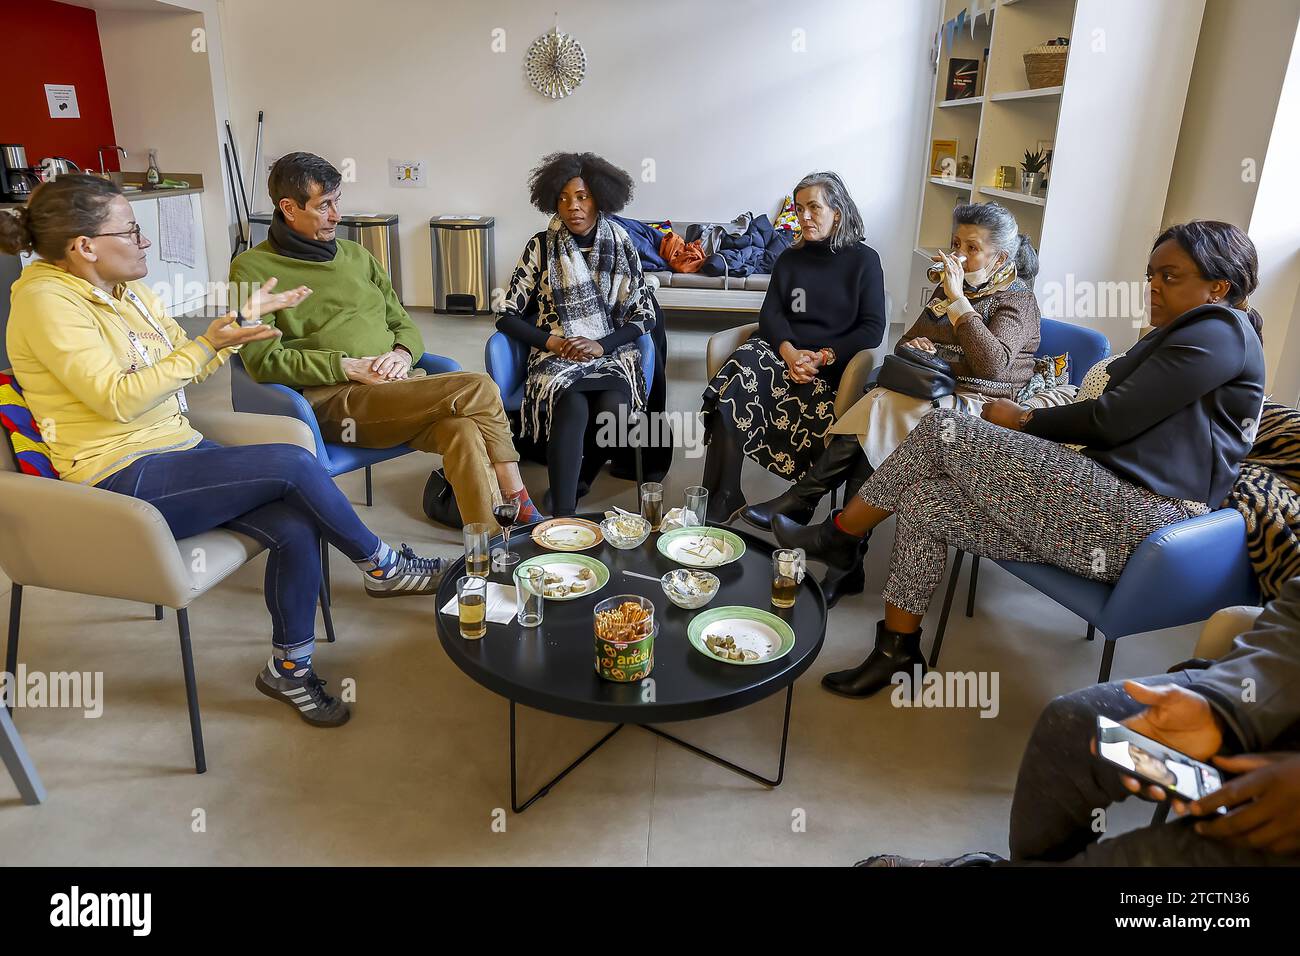 Dinner at la maison Bakhita, a center for migrants run by the Paris catholic diocese, France Stock Photo